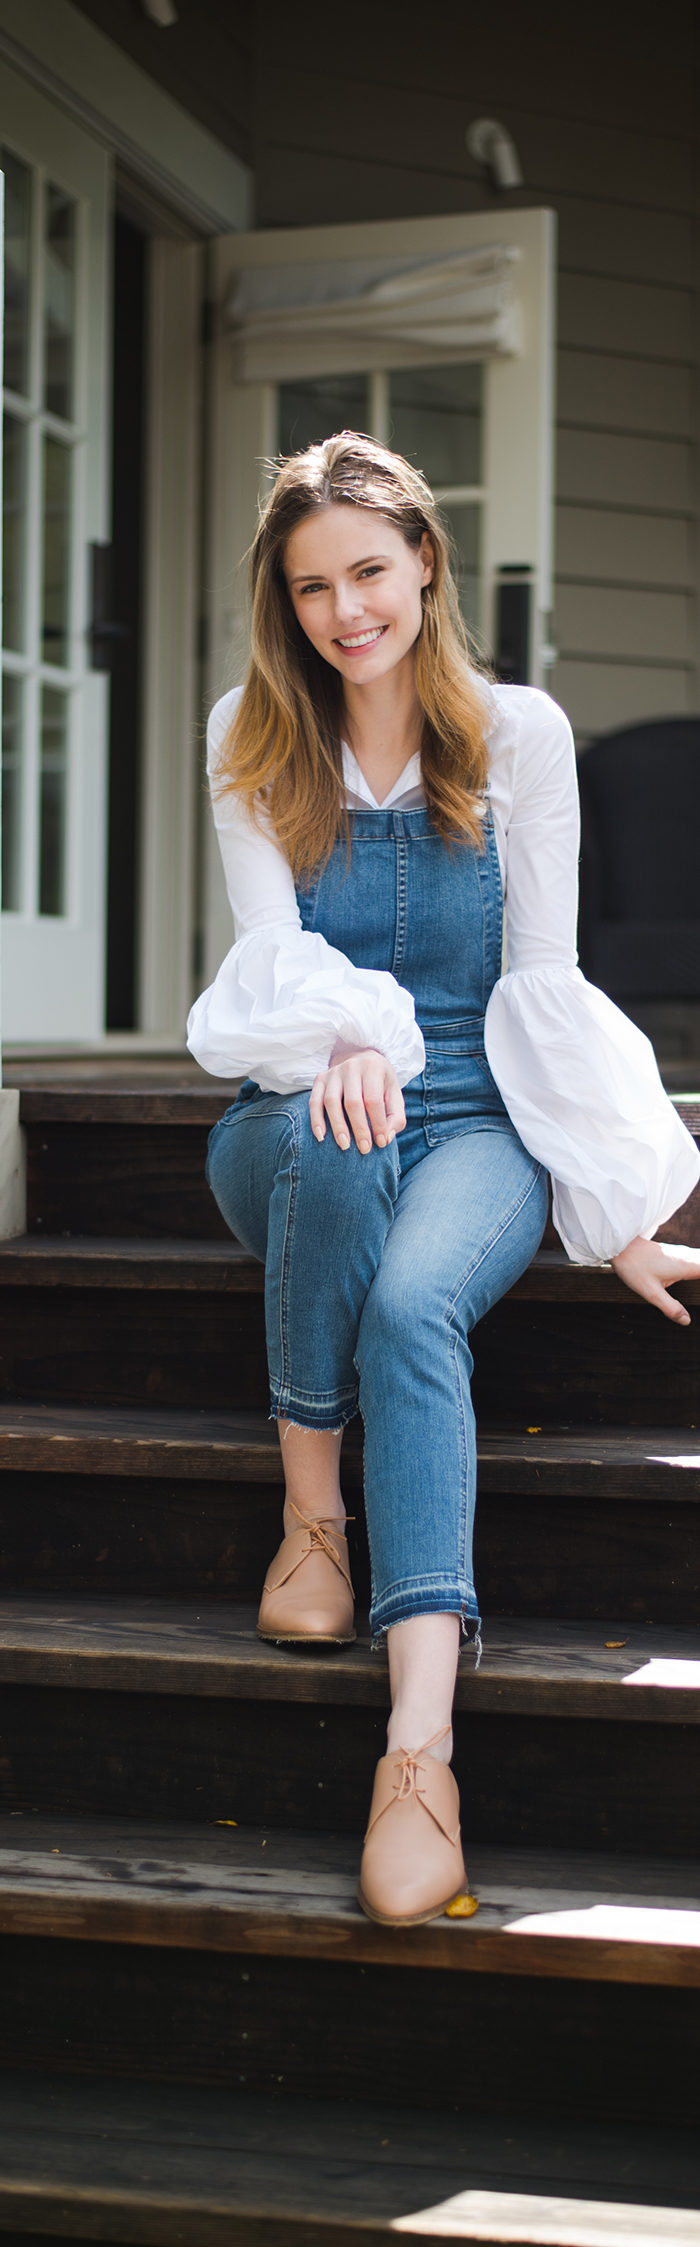 Miss USA 2011 Alyssa Campanella of The A List blog wearing Caroline Constas Jacqueline top and Madewell overalls at Meadowood Napa Valley for her birthday